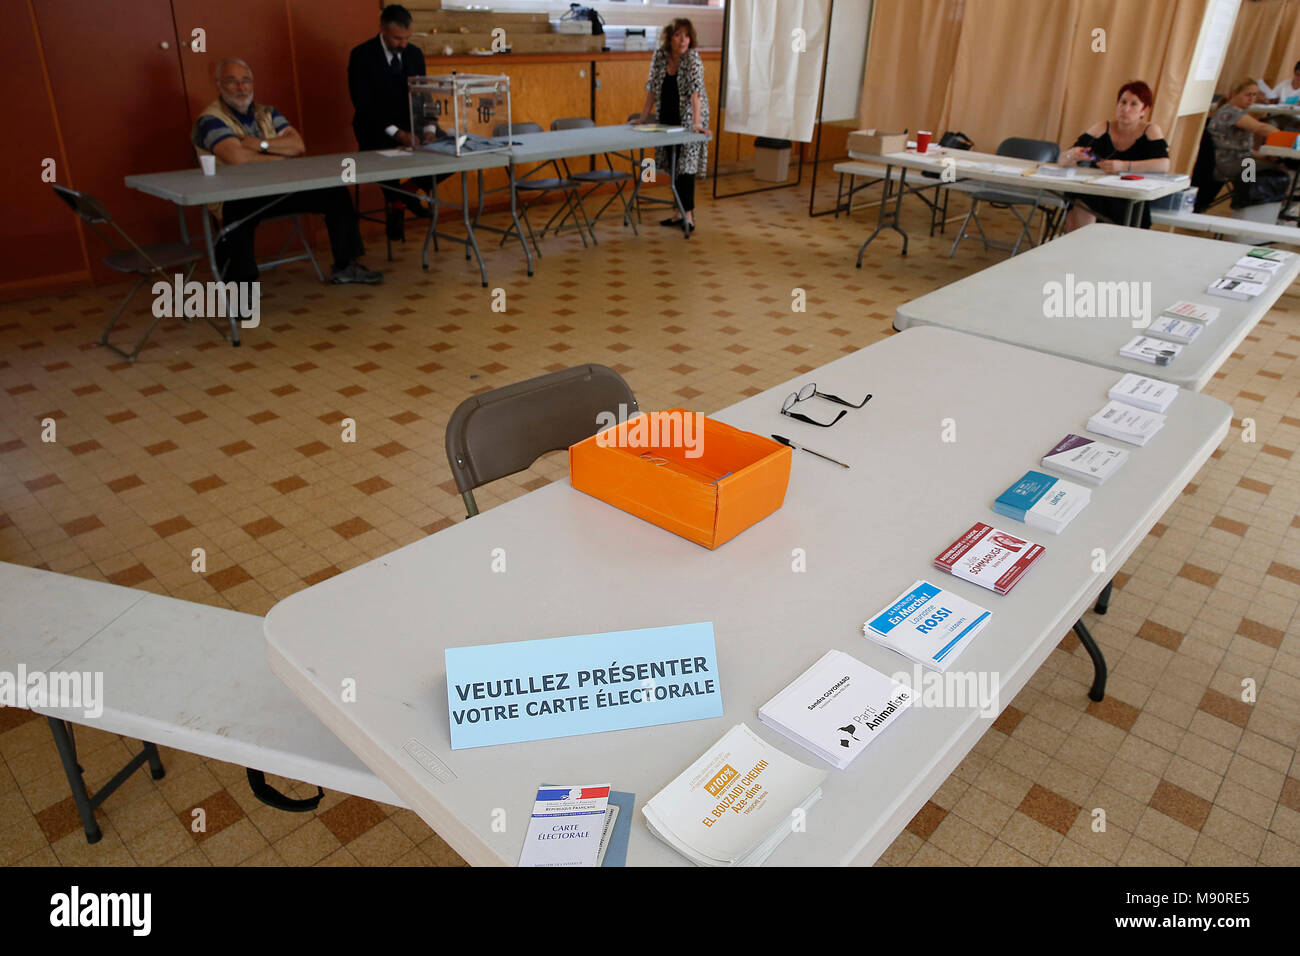 Polling station in France : voter's card and ballot papers. Montrouge, France. Stock Photo